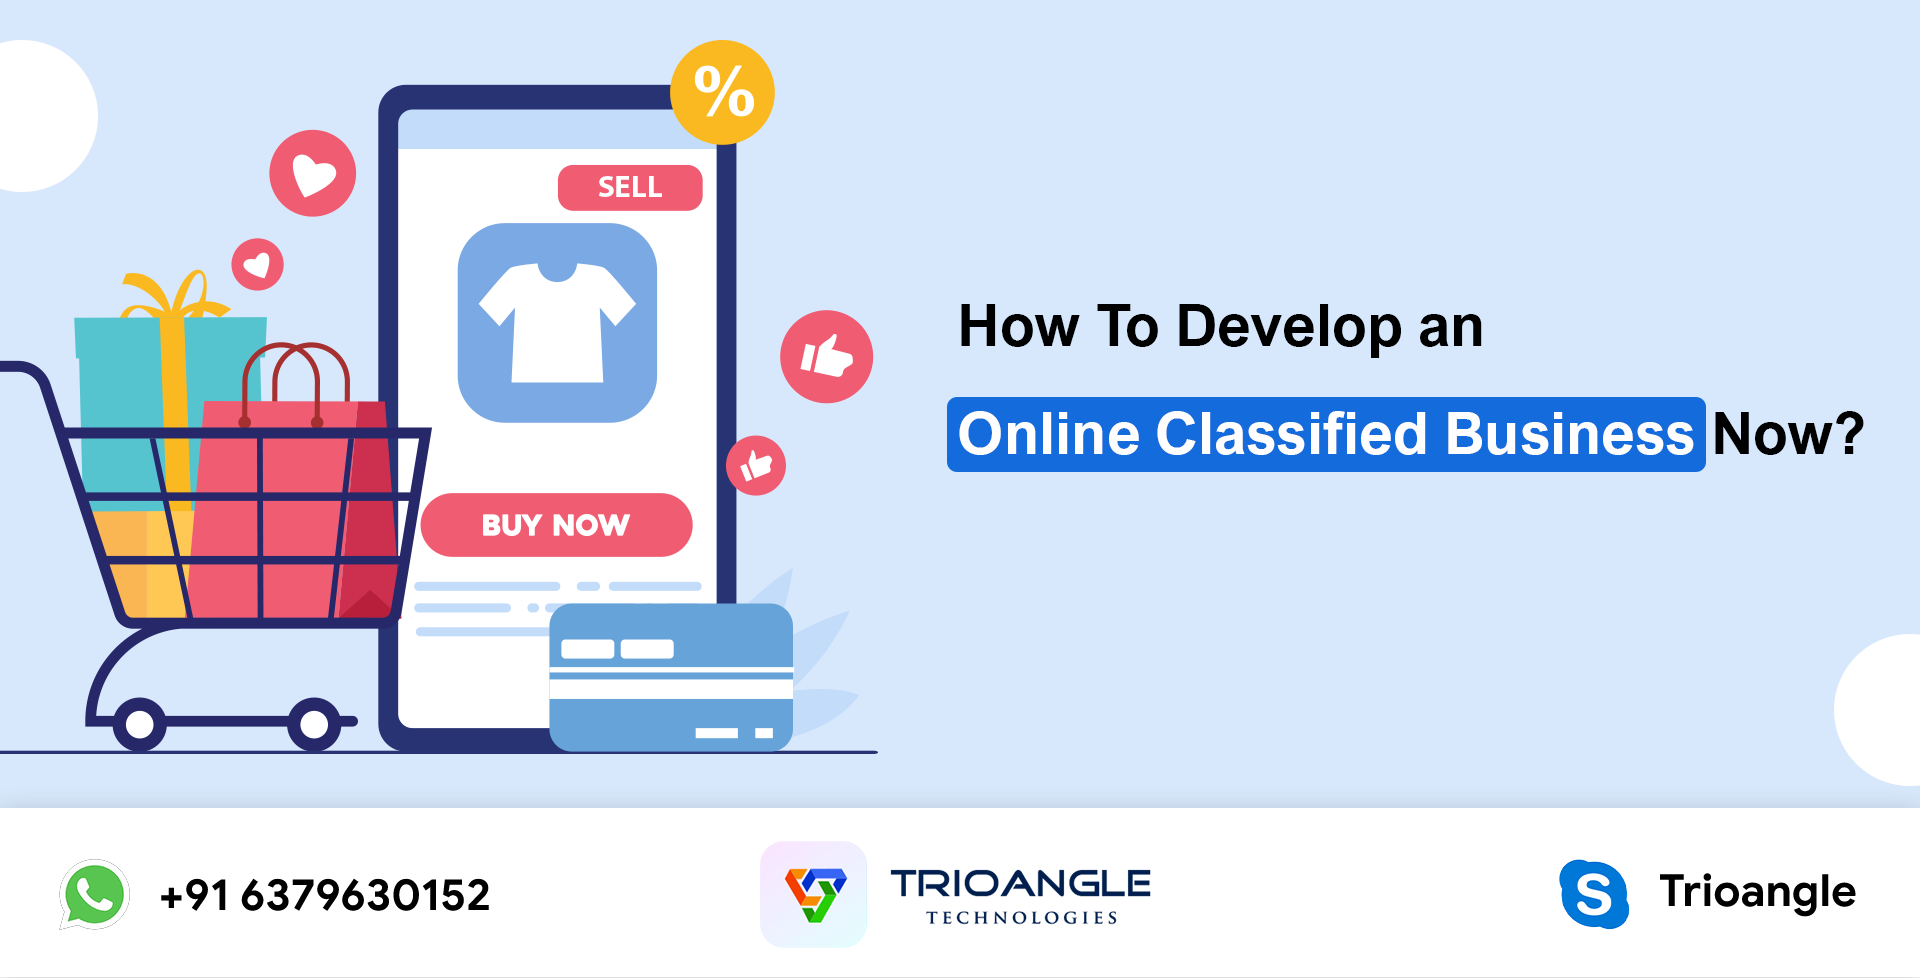 How To Develop an Online Classified Business Now!